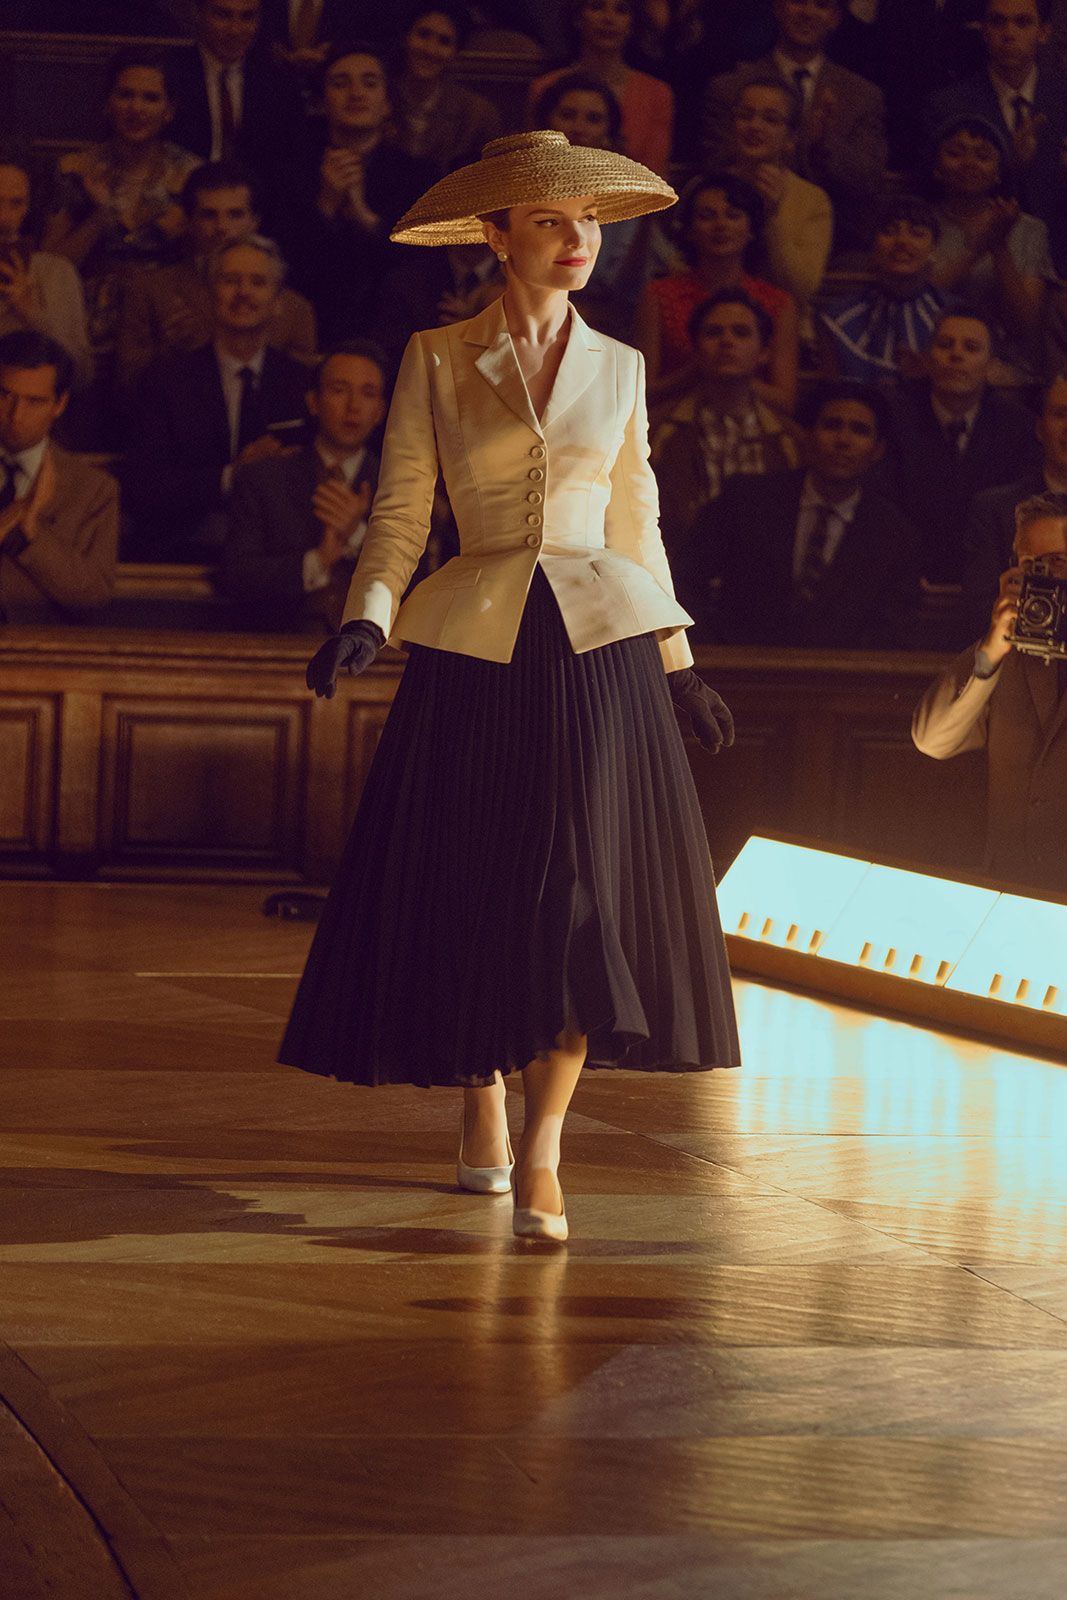 Dior's iconic “Bar” suit, consisting of a full black skirt and voluminous cream blazer that emphasizes the waist and shoulders, with an accompanying wide-brimmed hat, has been copiously referenced in fashion and pop culture.